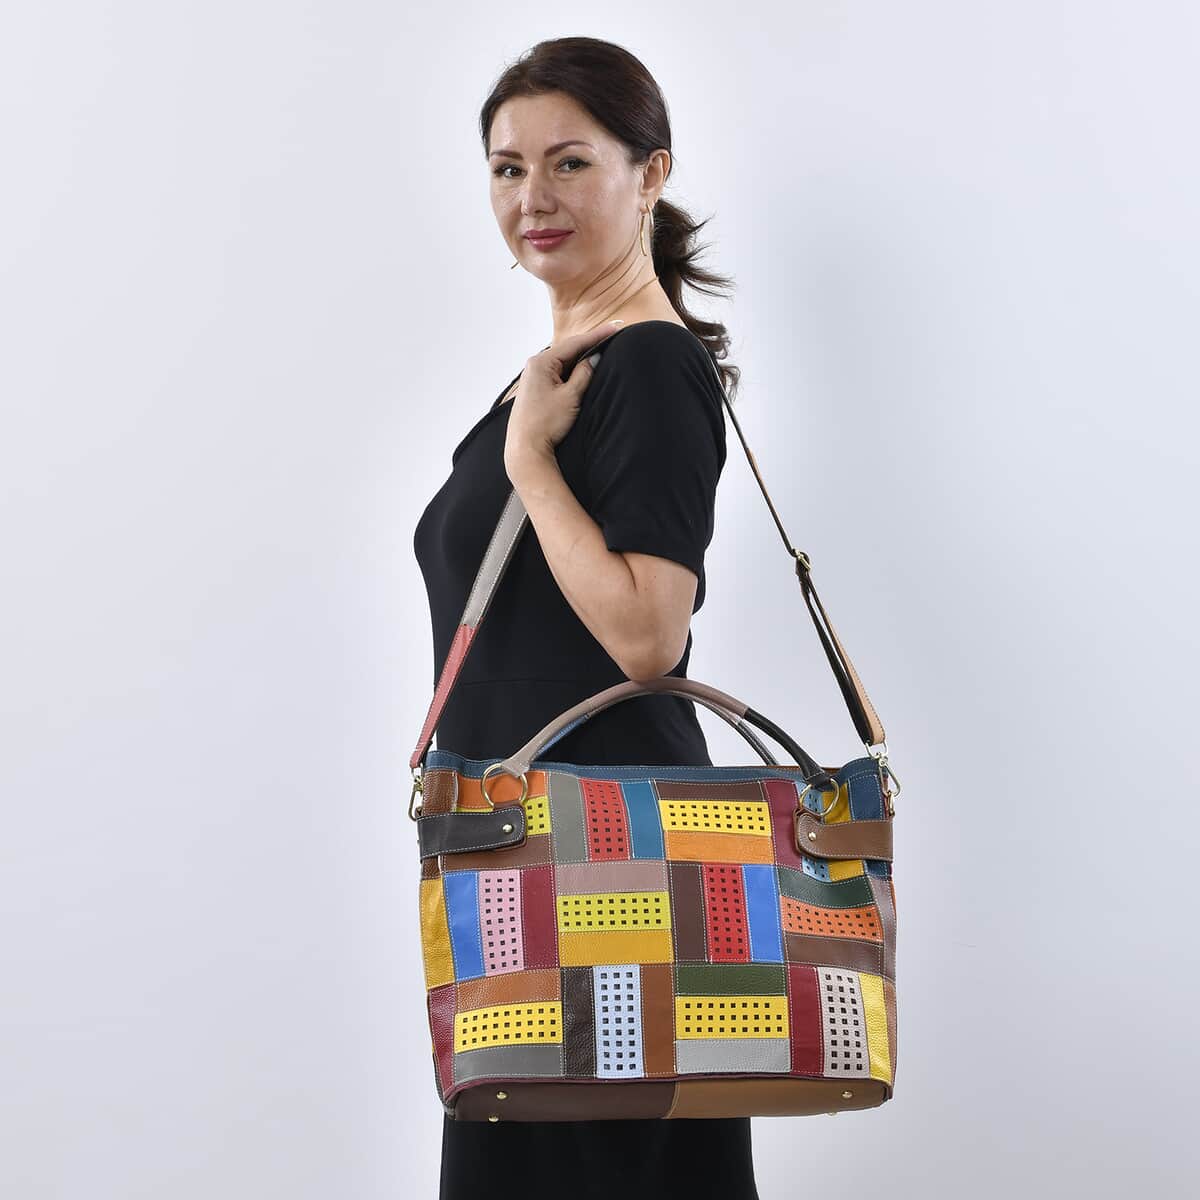 Rainbow Color Genuine Leather Tote Bag (16.9"x5.9"x12.6") with Handle Drop and Detachable Shoulder Strap image number 1